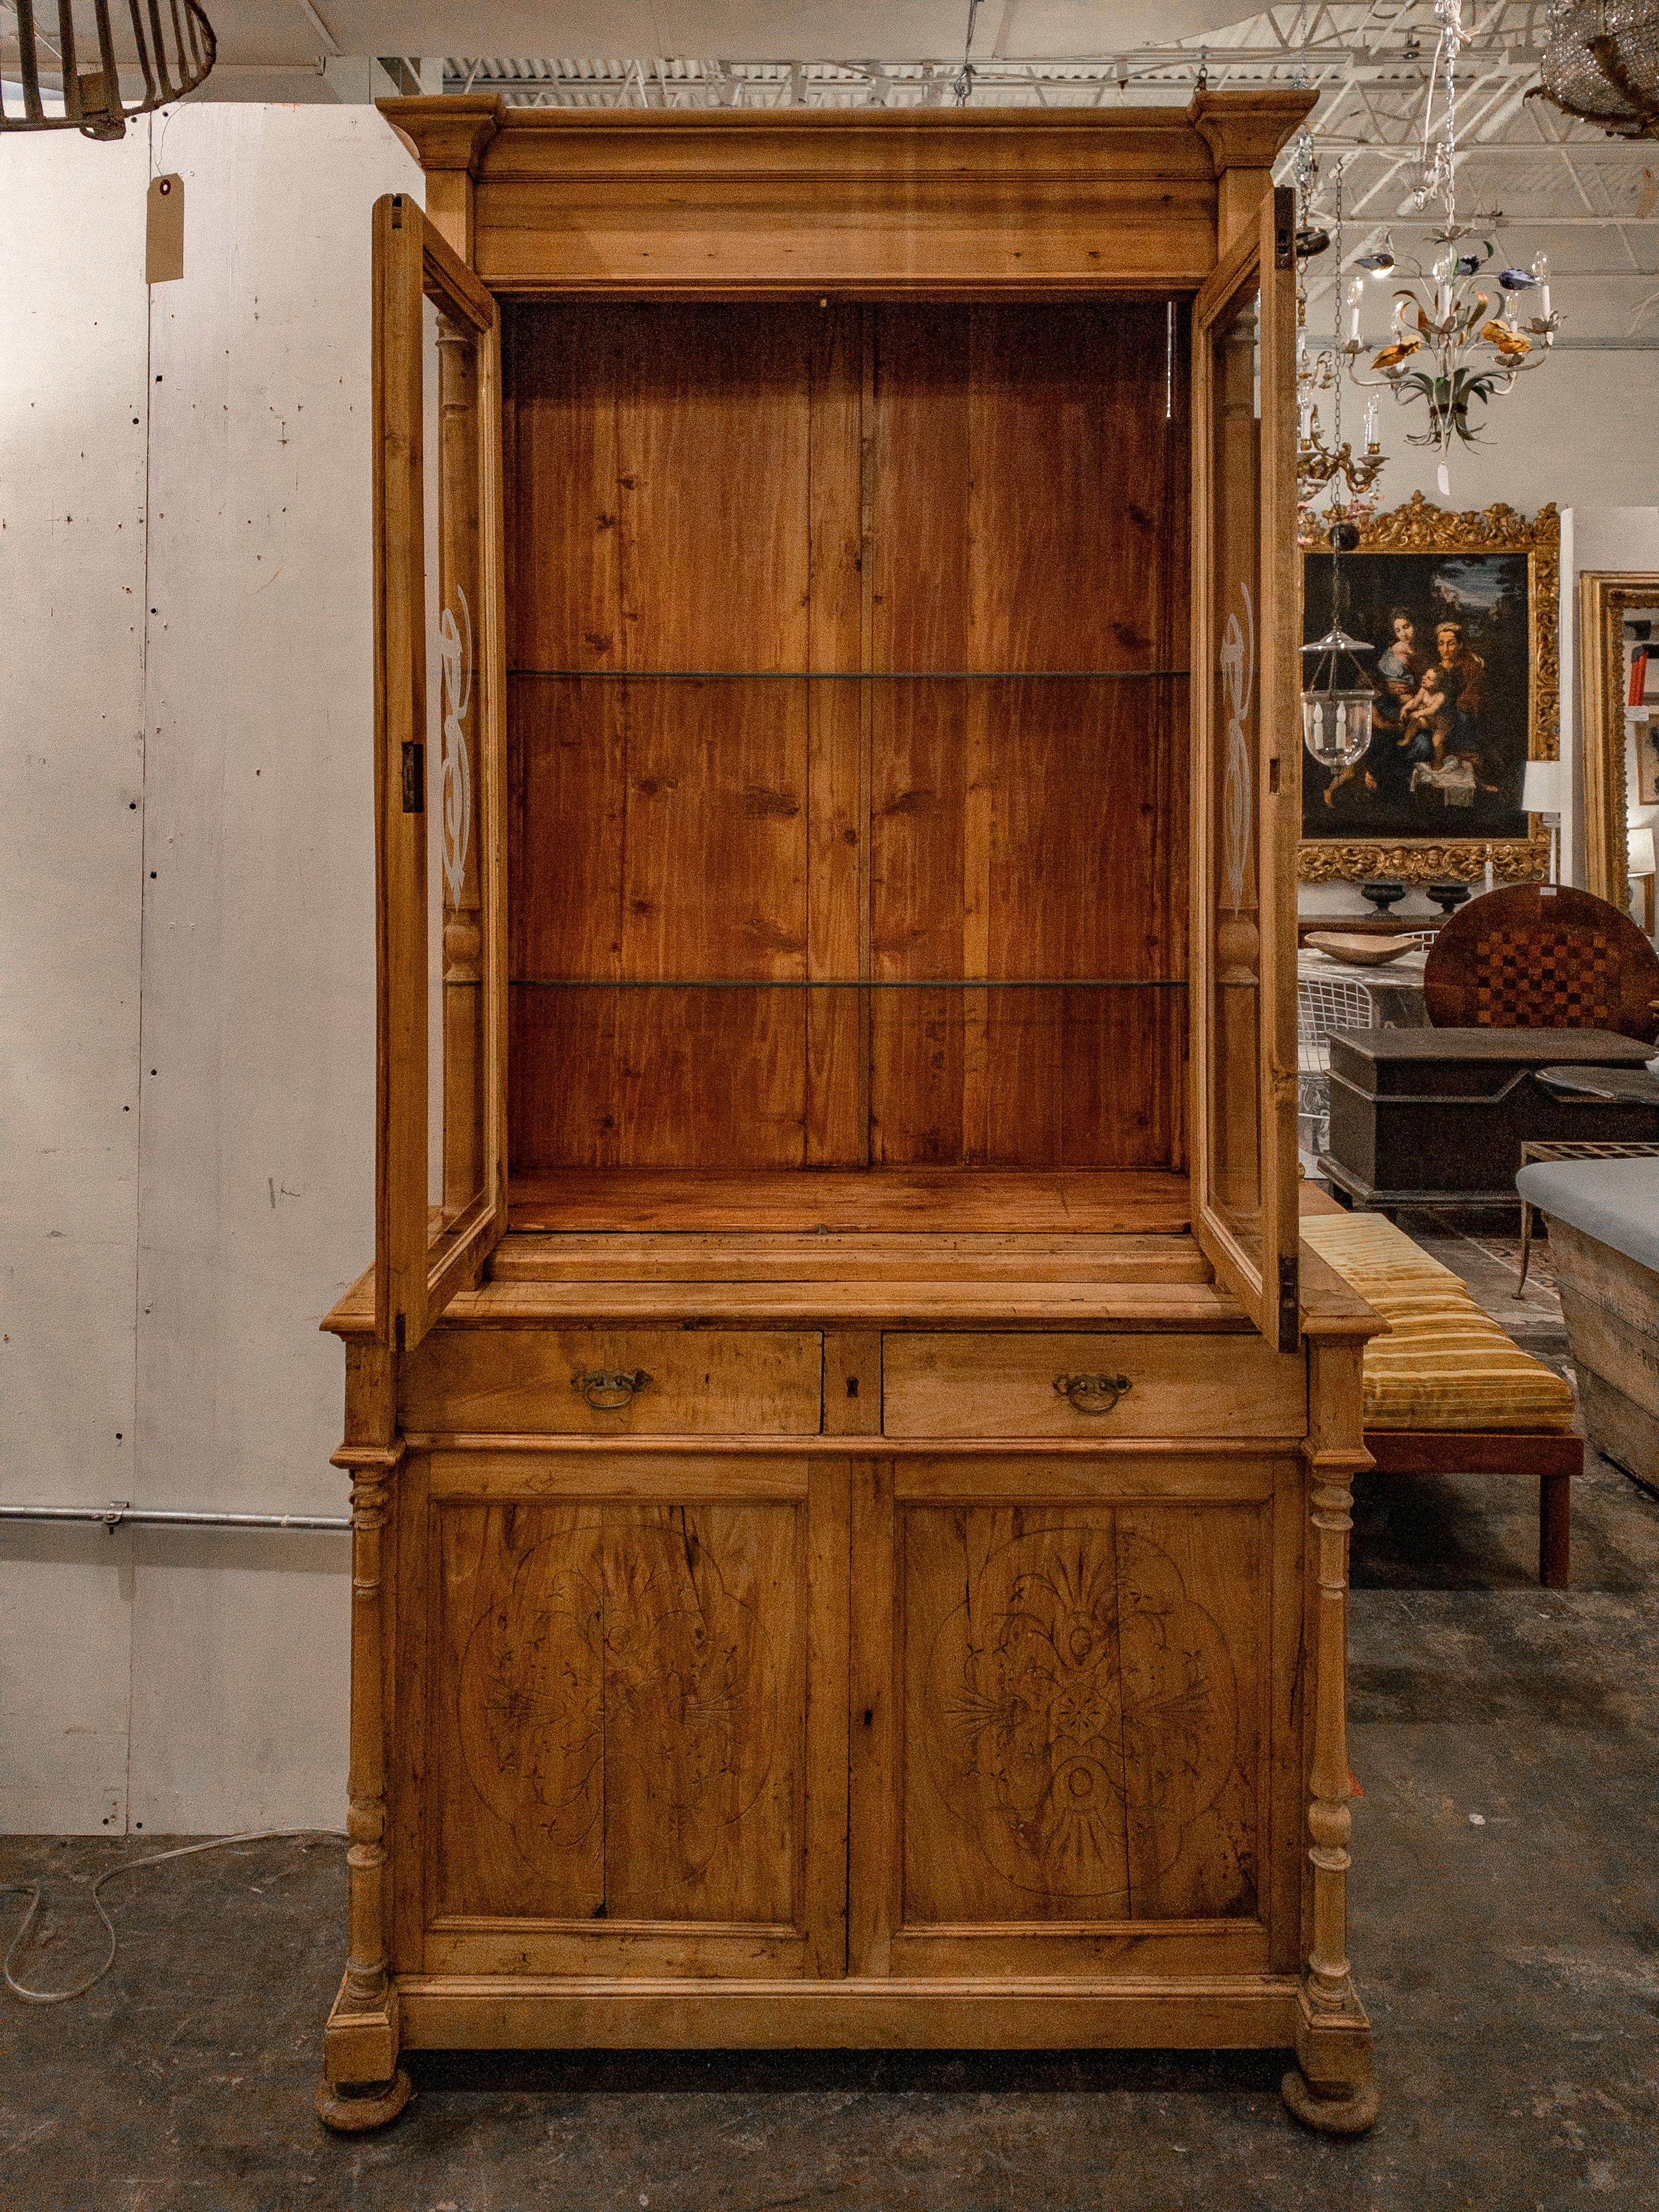 The 19th Century European Pine Bookcase exudes elegance and functionality through its exquisite craftsmanship and thoughtful design. Intricately carved details adorn its exterior, showcasing the skilled handiwork of the era. The two etched glazed